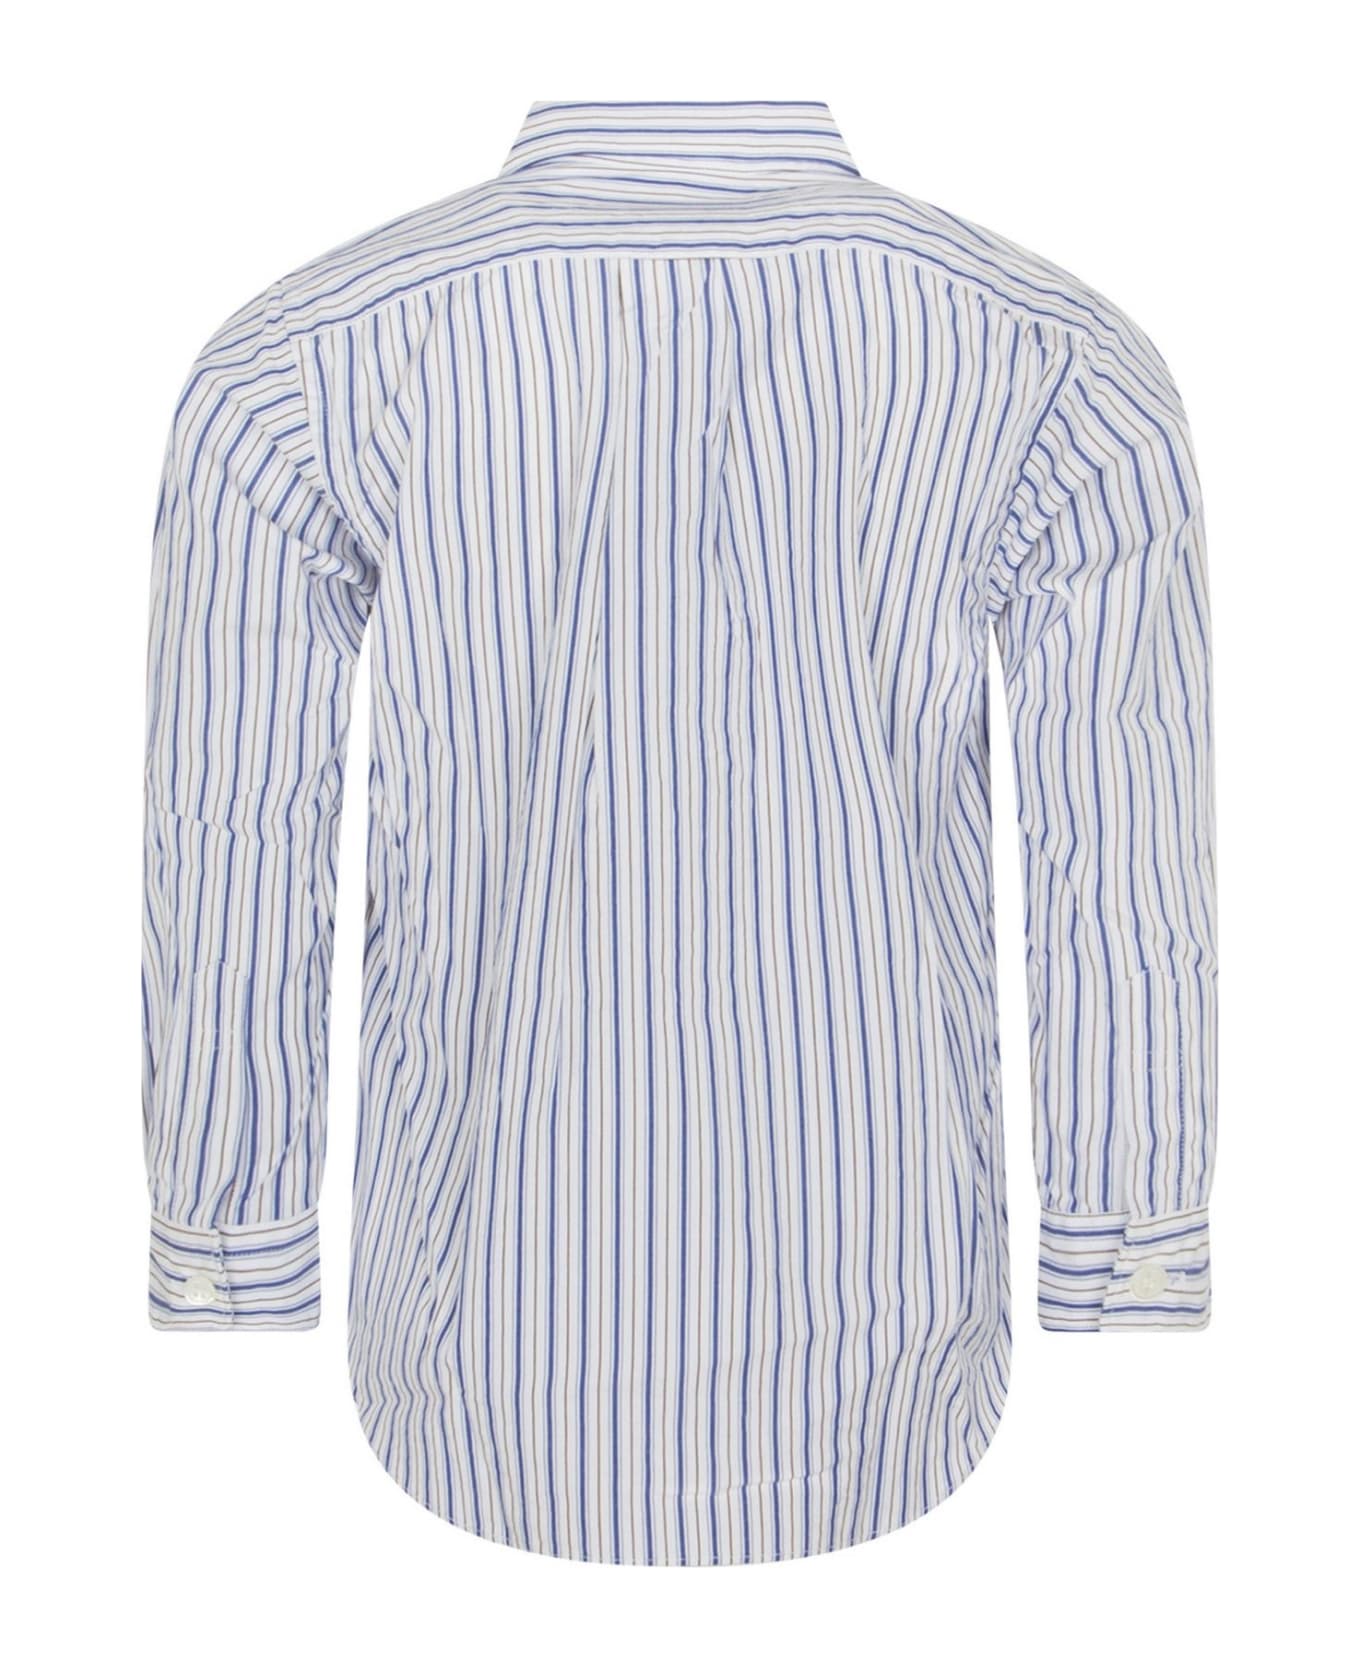 Comme des Garçons Play Striped Shirt For Kids With Iconic Logo - Light Blue シャツ